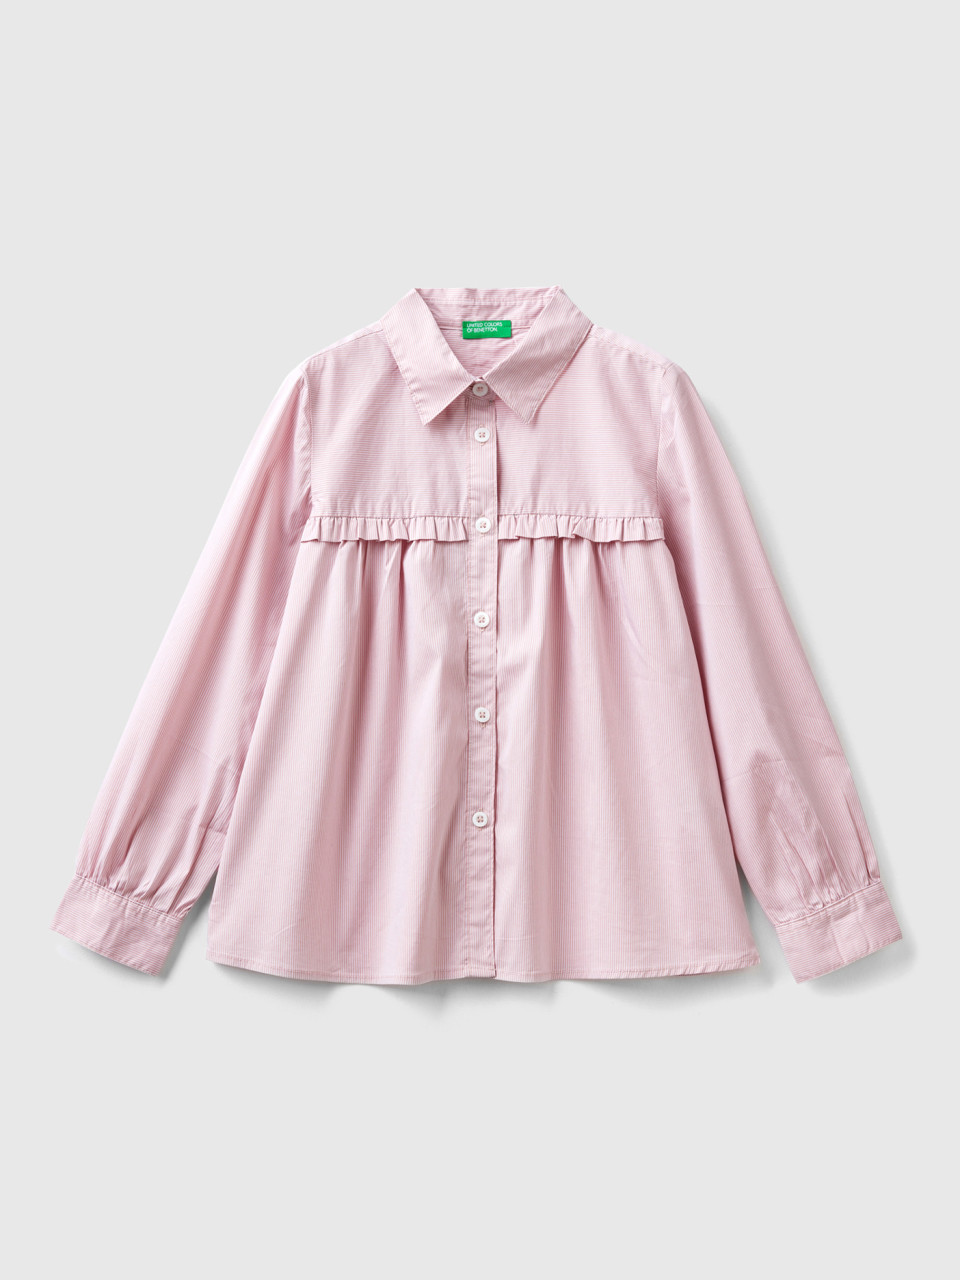 Benetton, Shirt With Rouches On The Yoke, Soft Pink, Kids